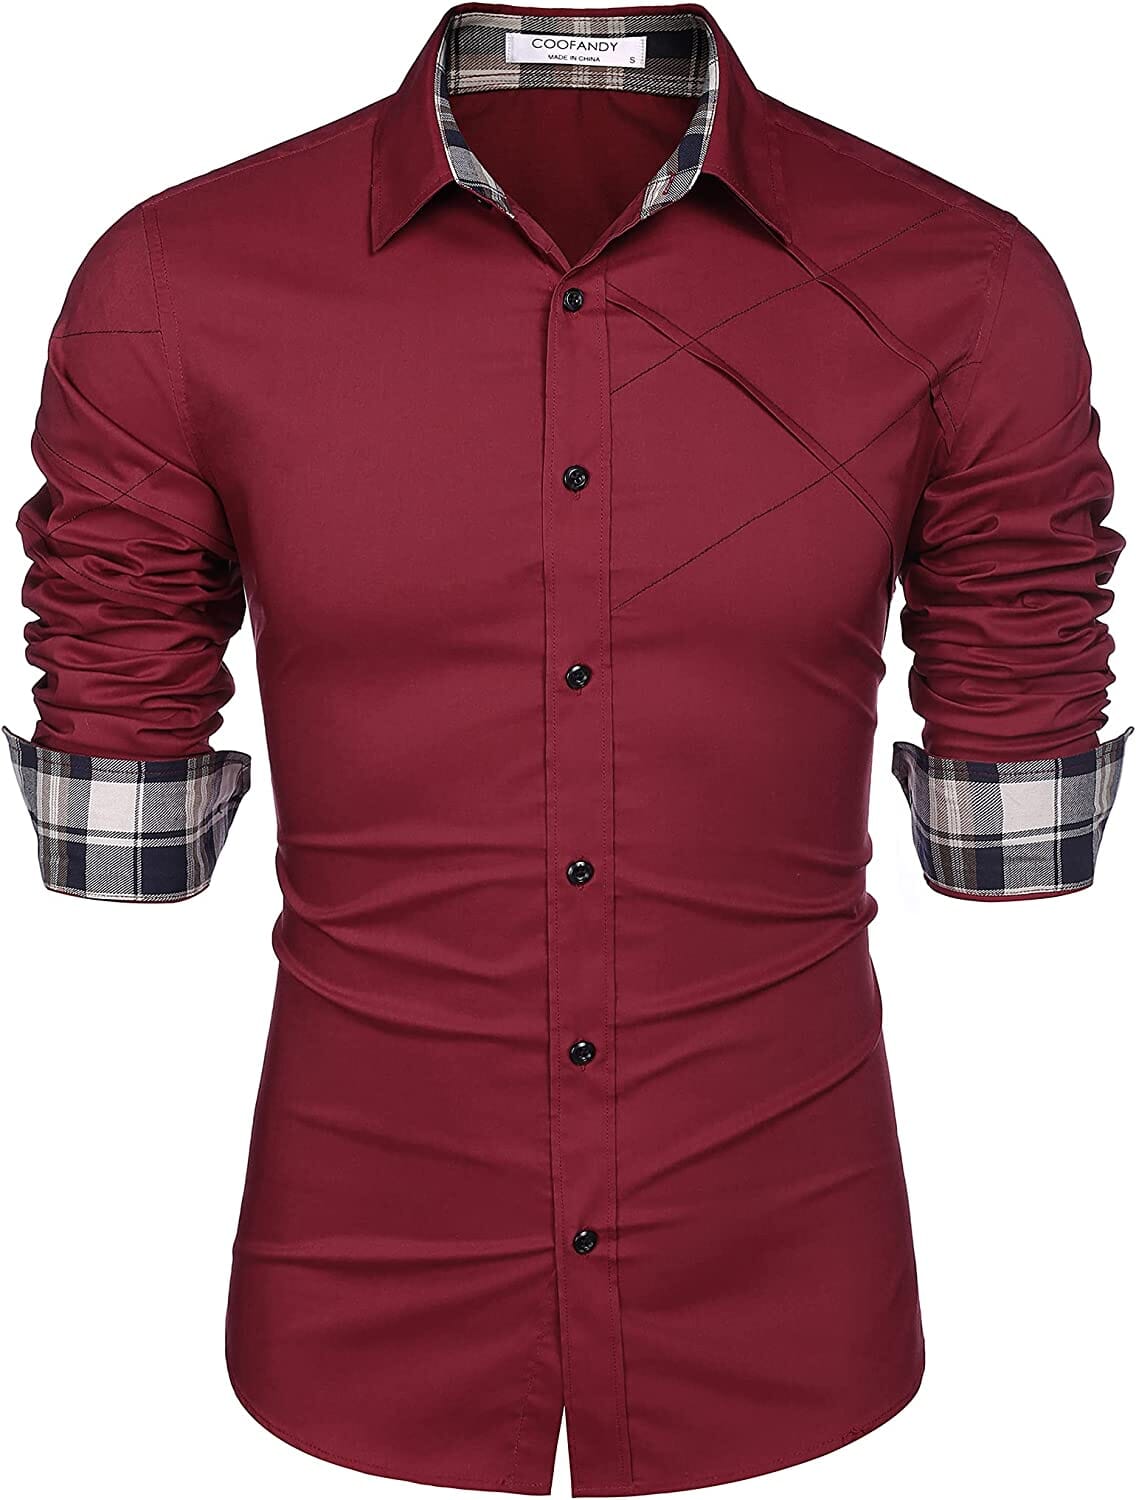 Plaid Collar Button Cotton Dress Shirt (US Only) Shirts COOFANDY Store Wine Red S 